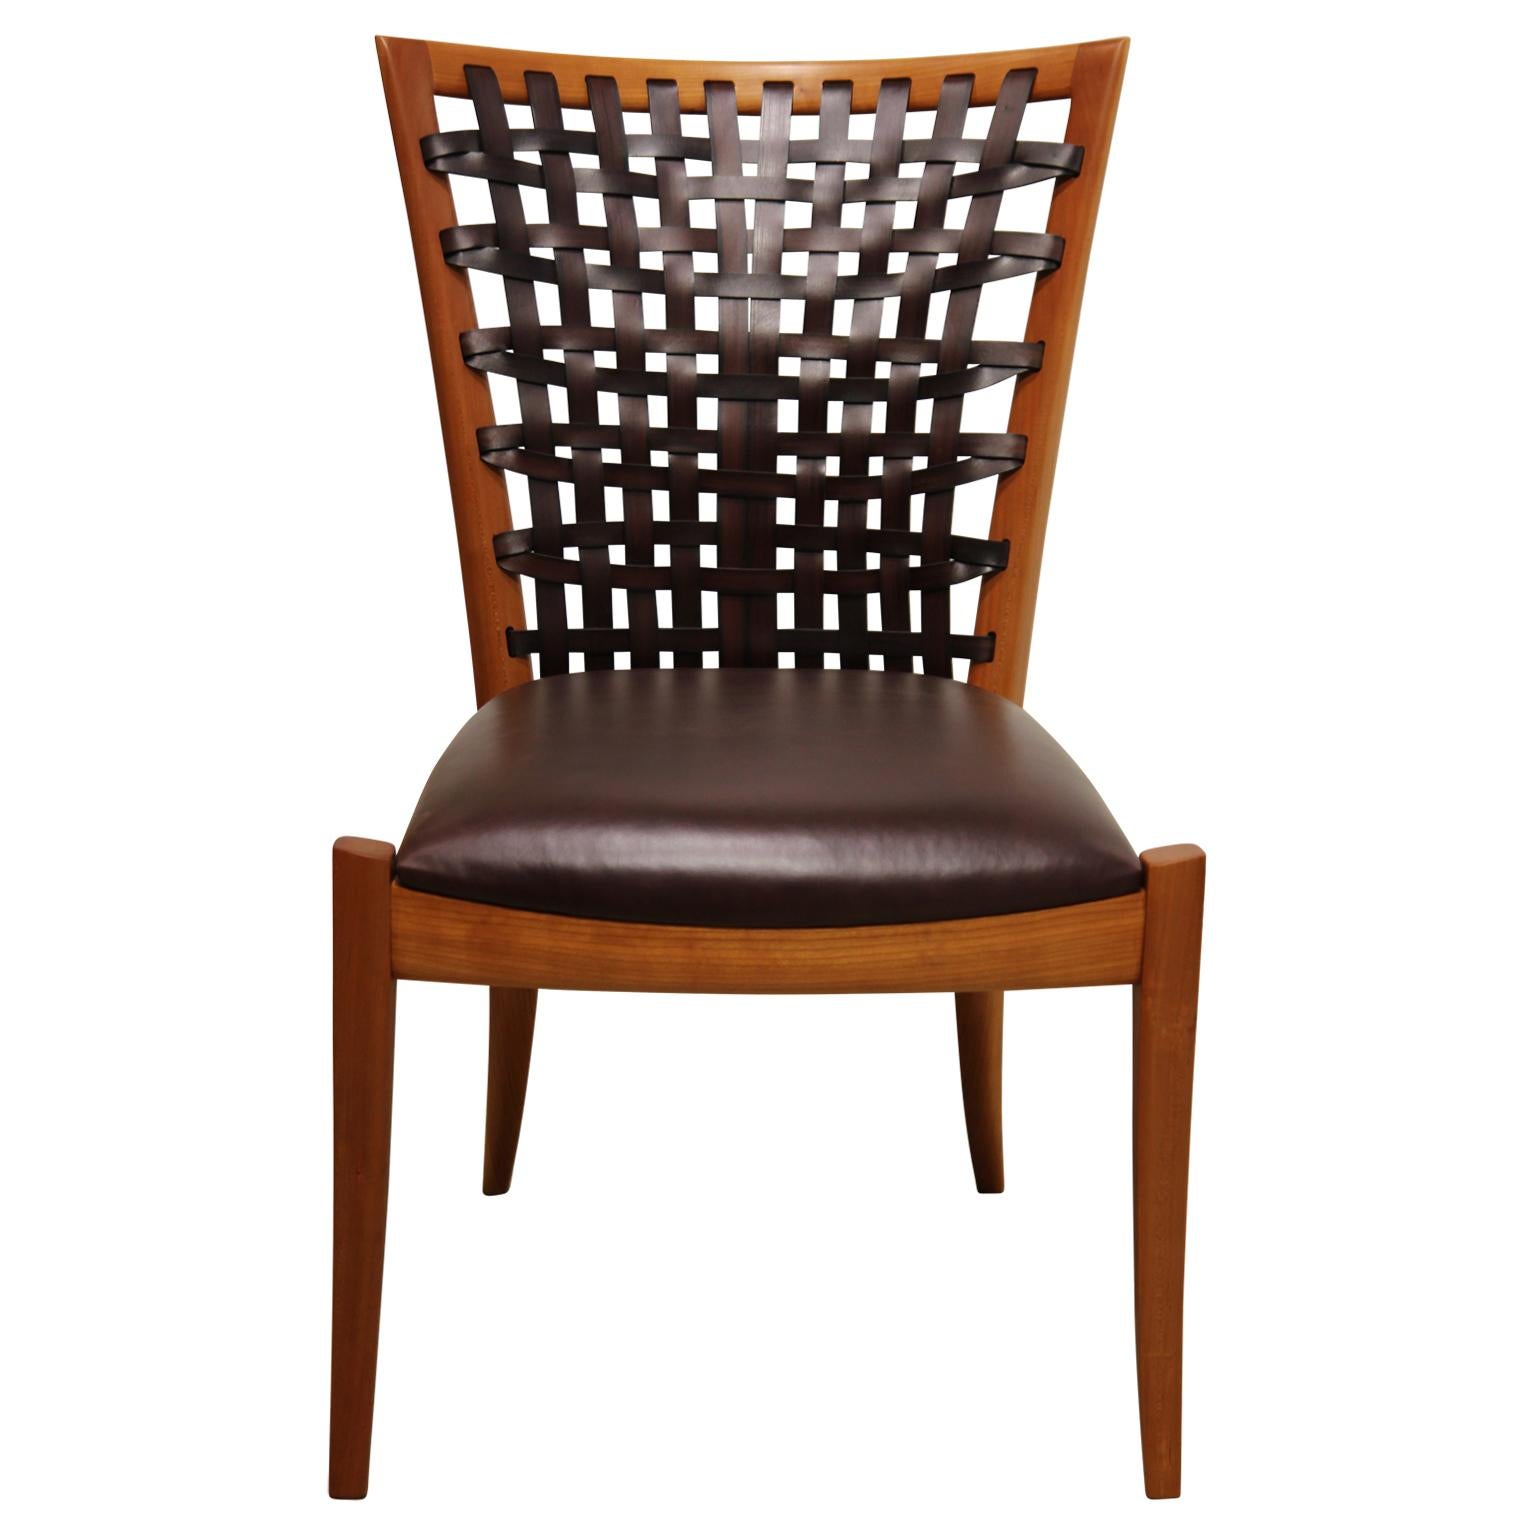 American Set of 6 Sculptural Modern Dining Chairs with Woven Leather by Roger Deatherage